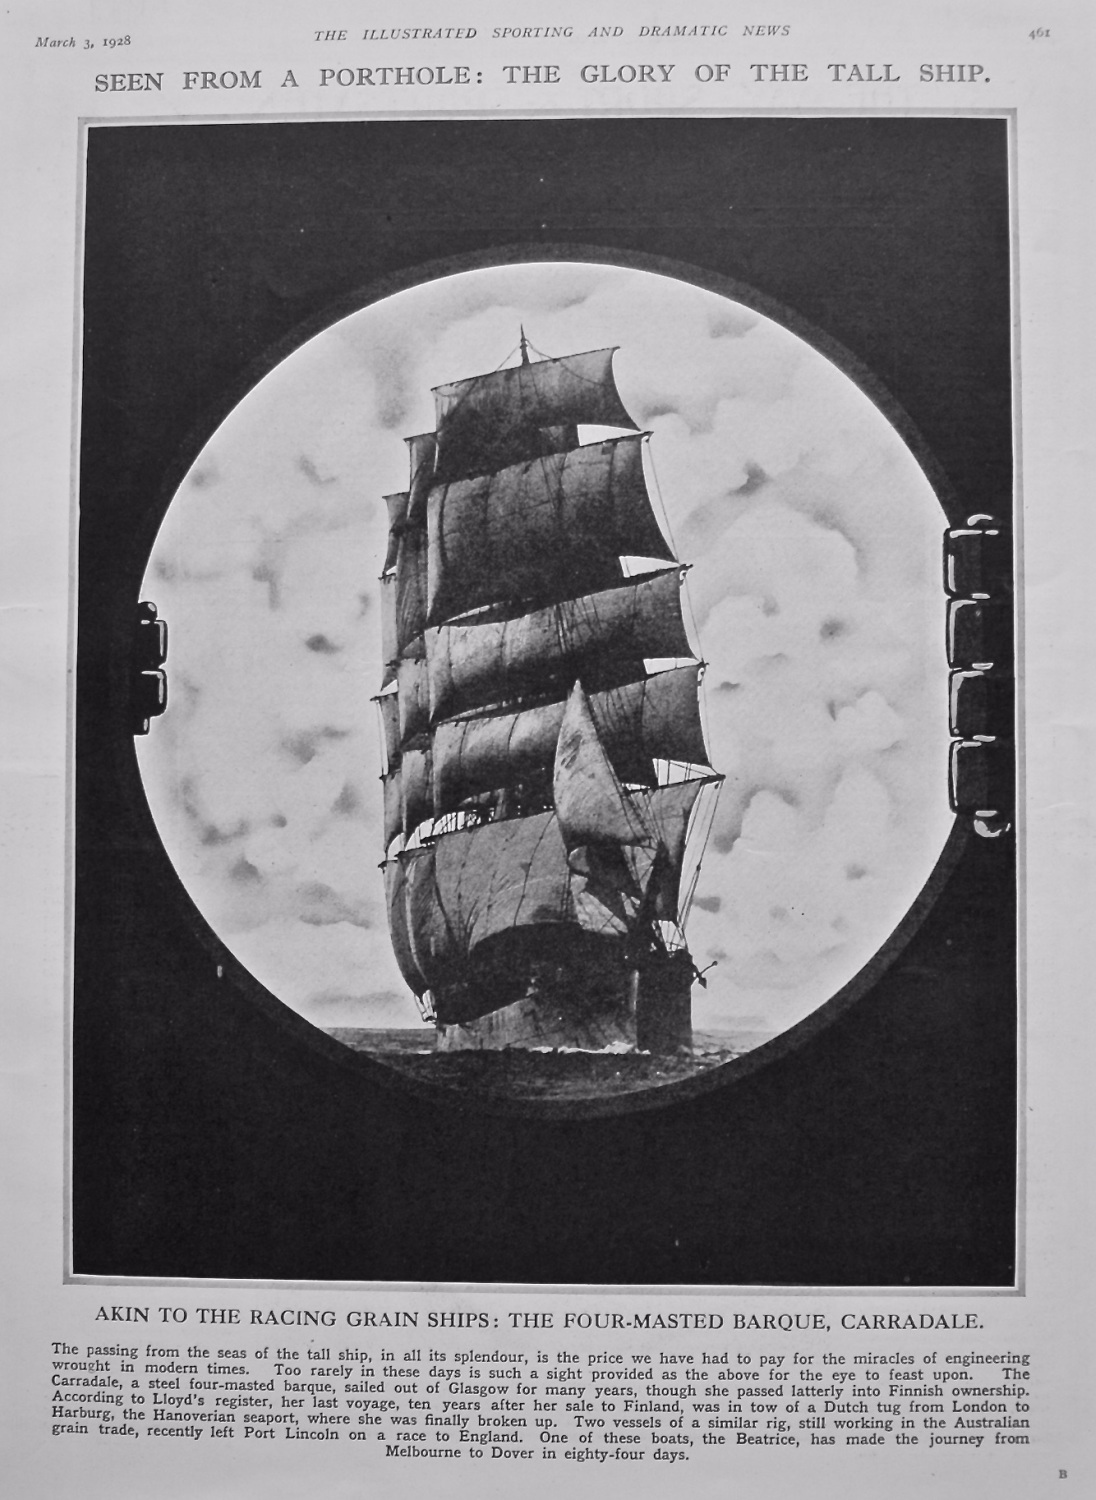 Seen from a Porthole : The Glory of the Tall Ship.  1928.